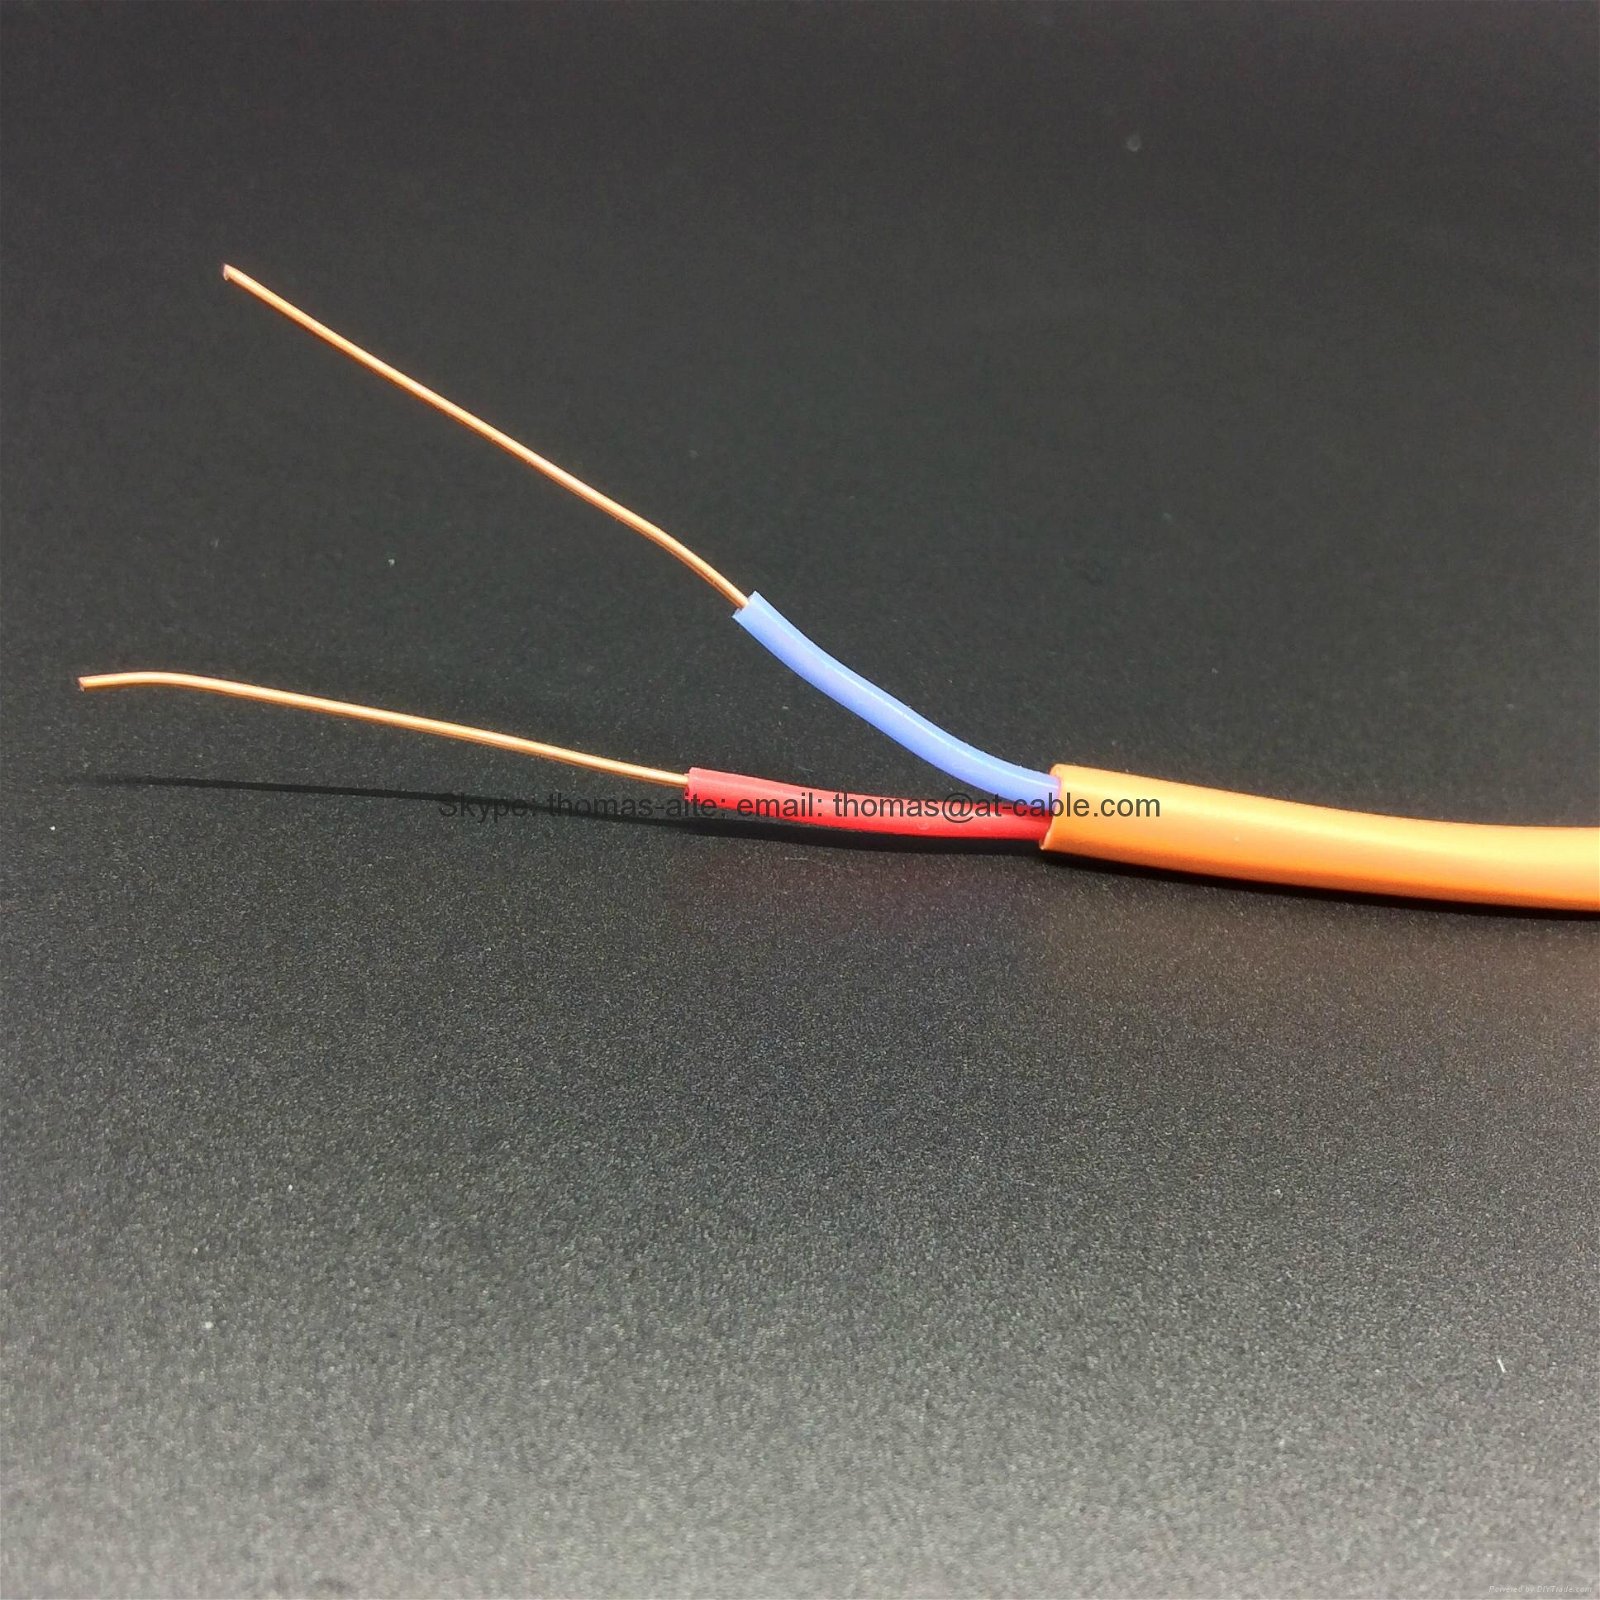 Power limited, fire protective signaling circuit cable